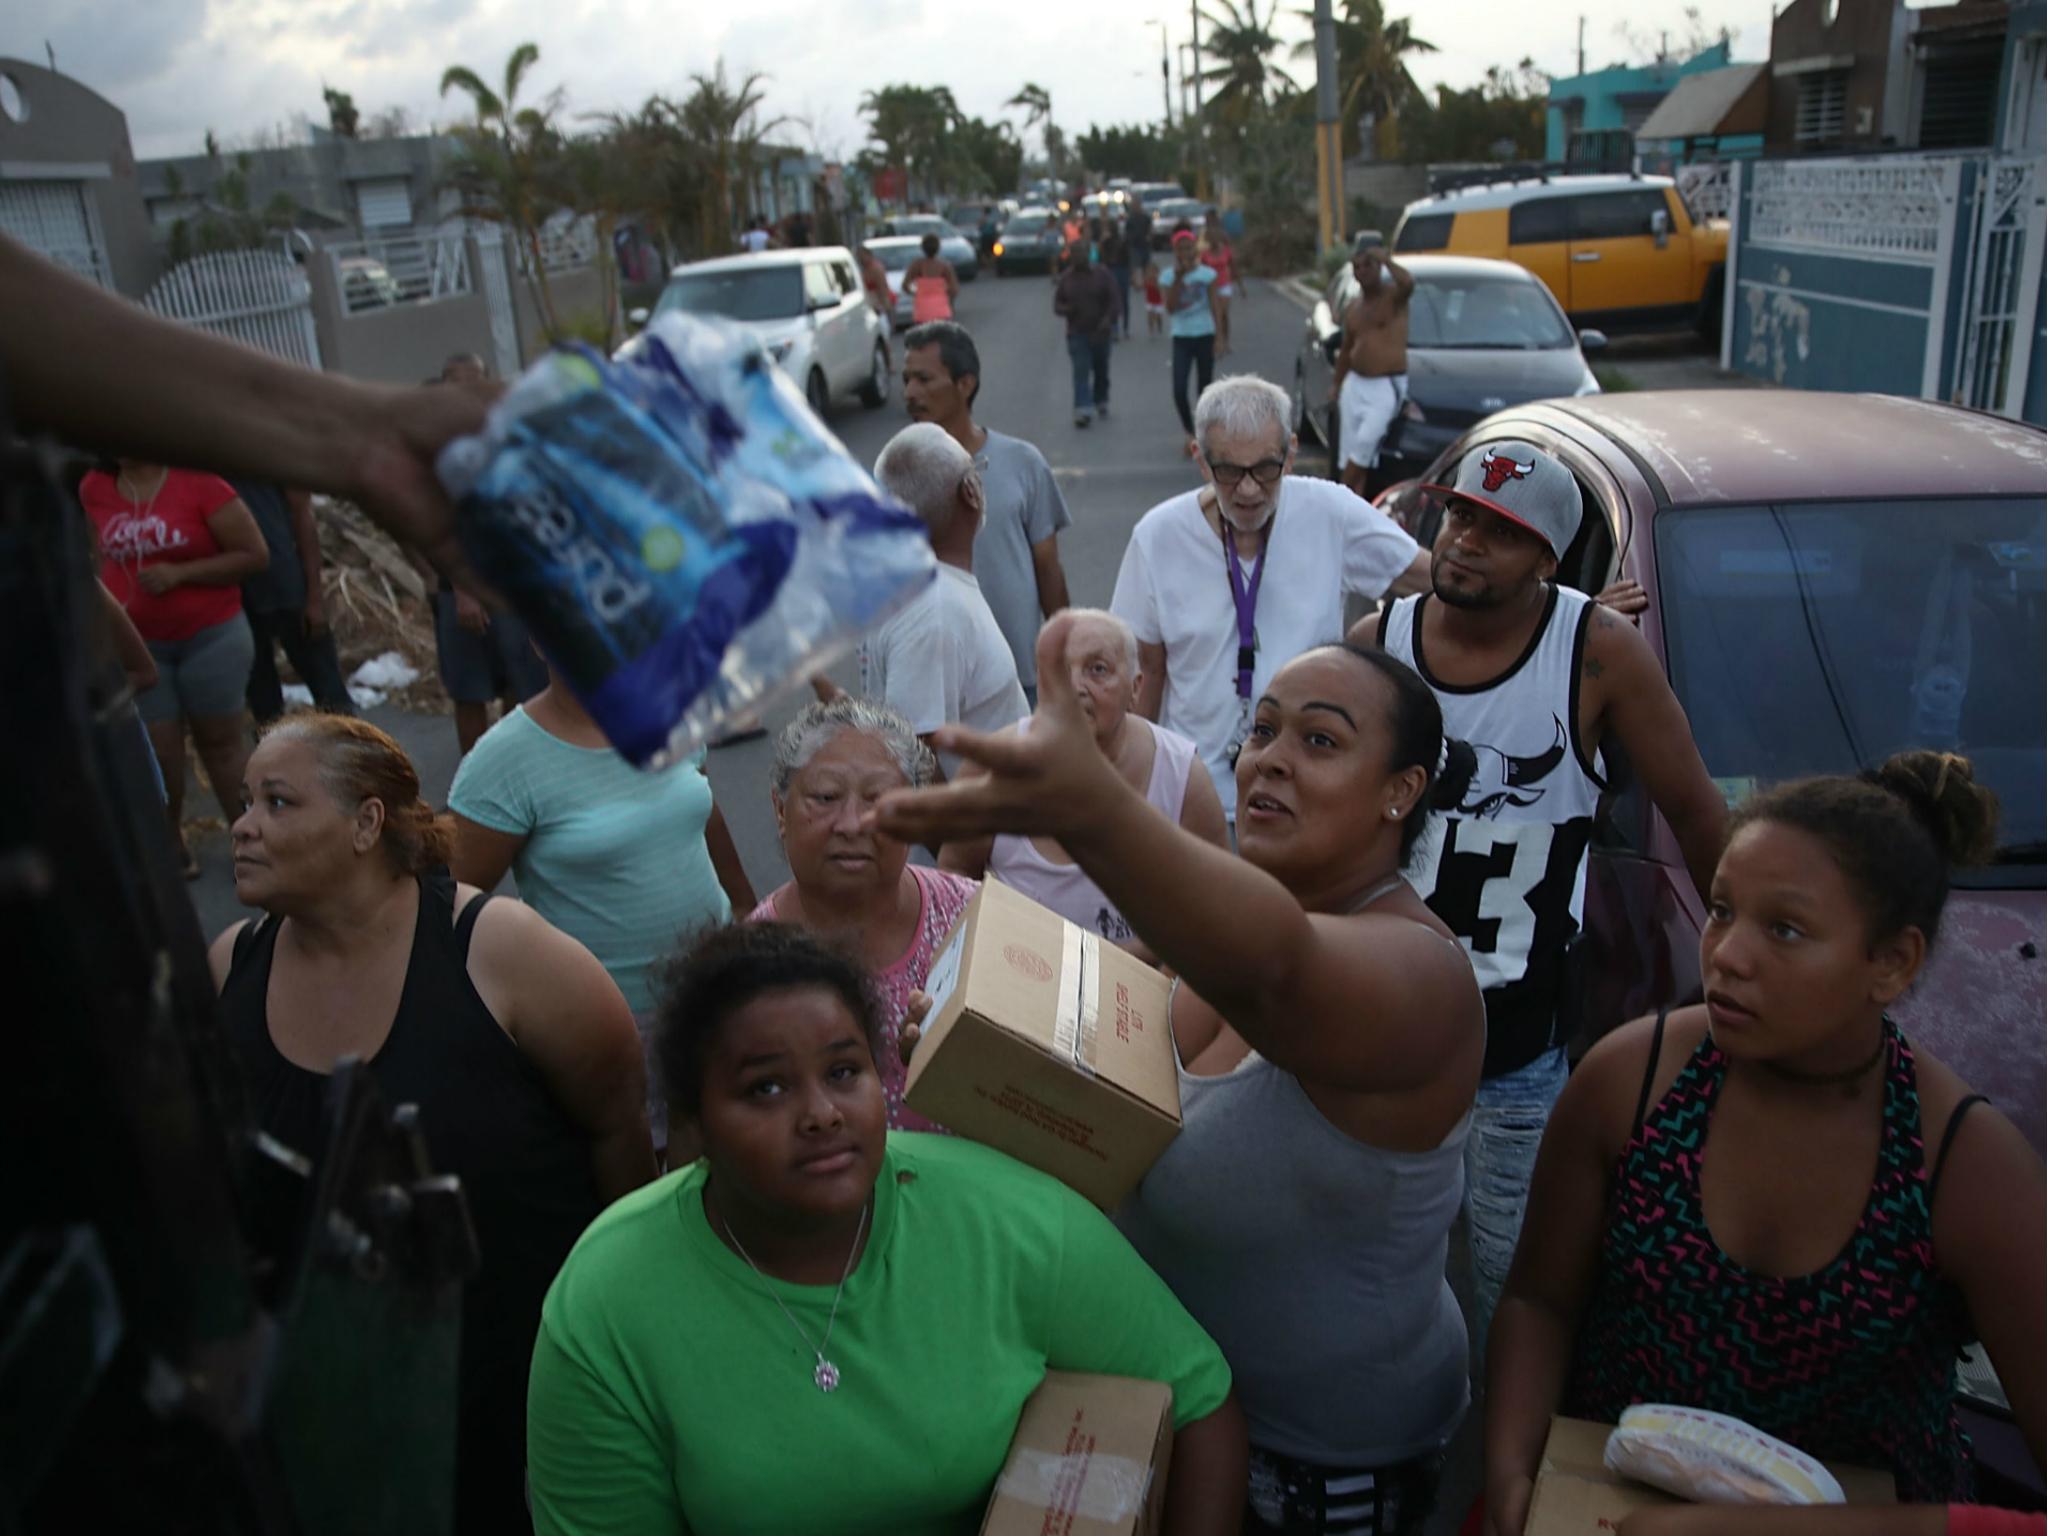 Hurricane survivors receive food and water being given out by volunteers and municipal police as they deal with the aftermath of Hurricane Maria on 28 September 2017 in Toa Baja, Puerto Rico.